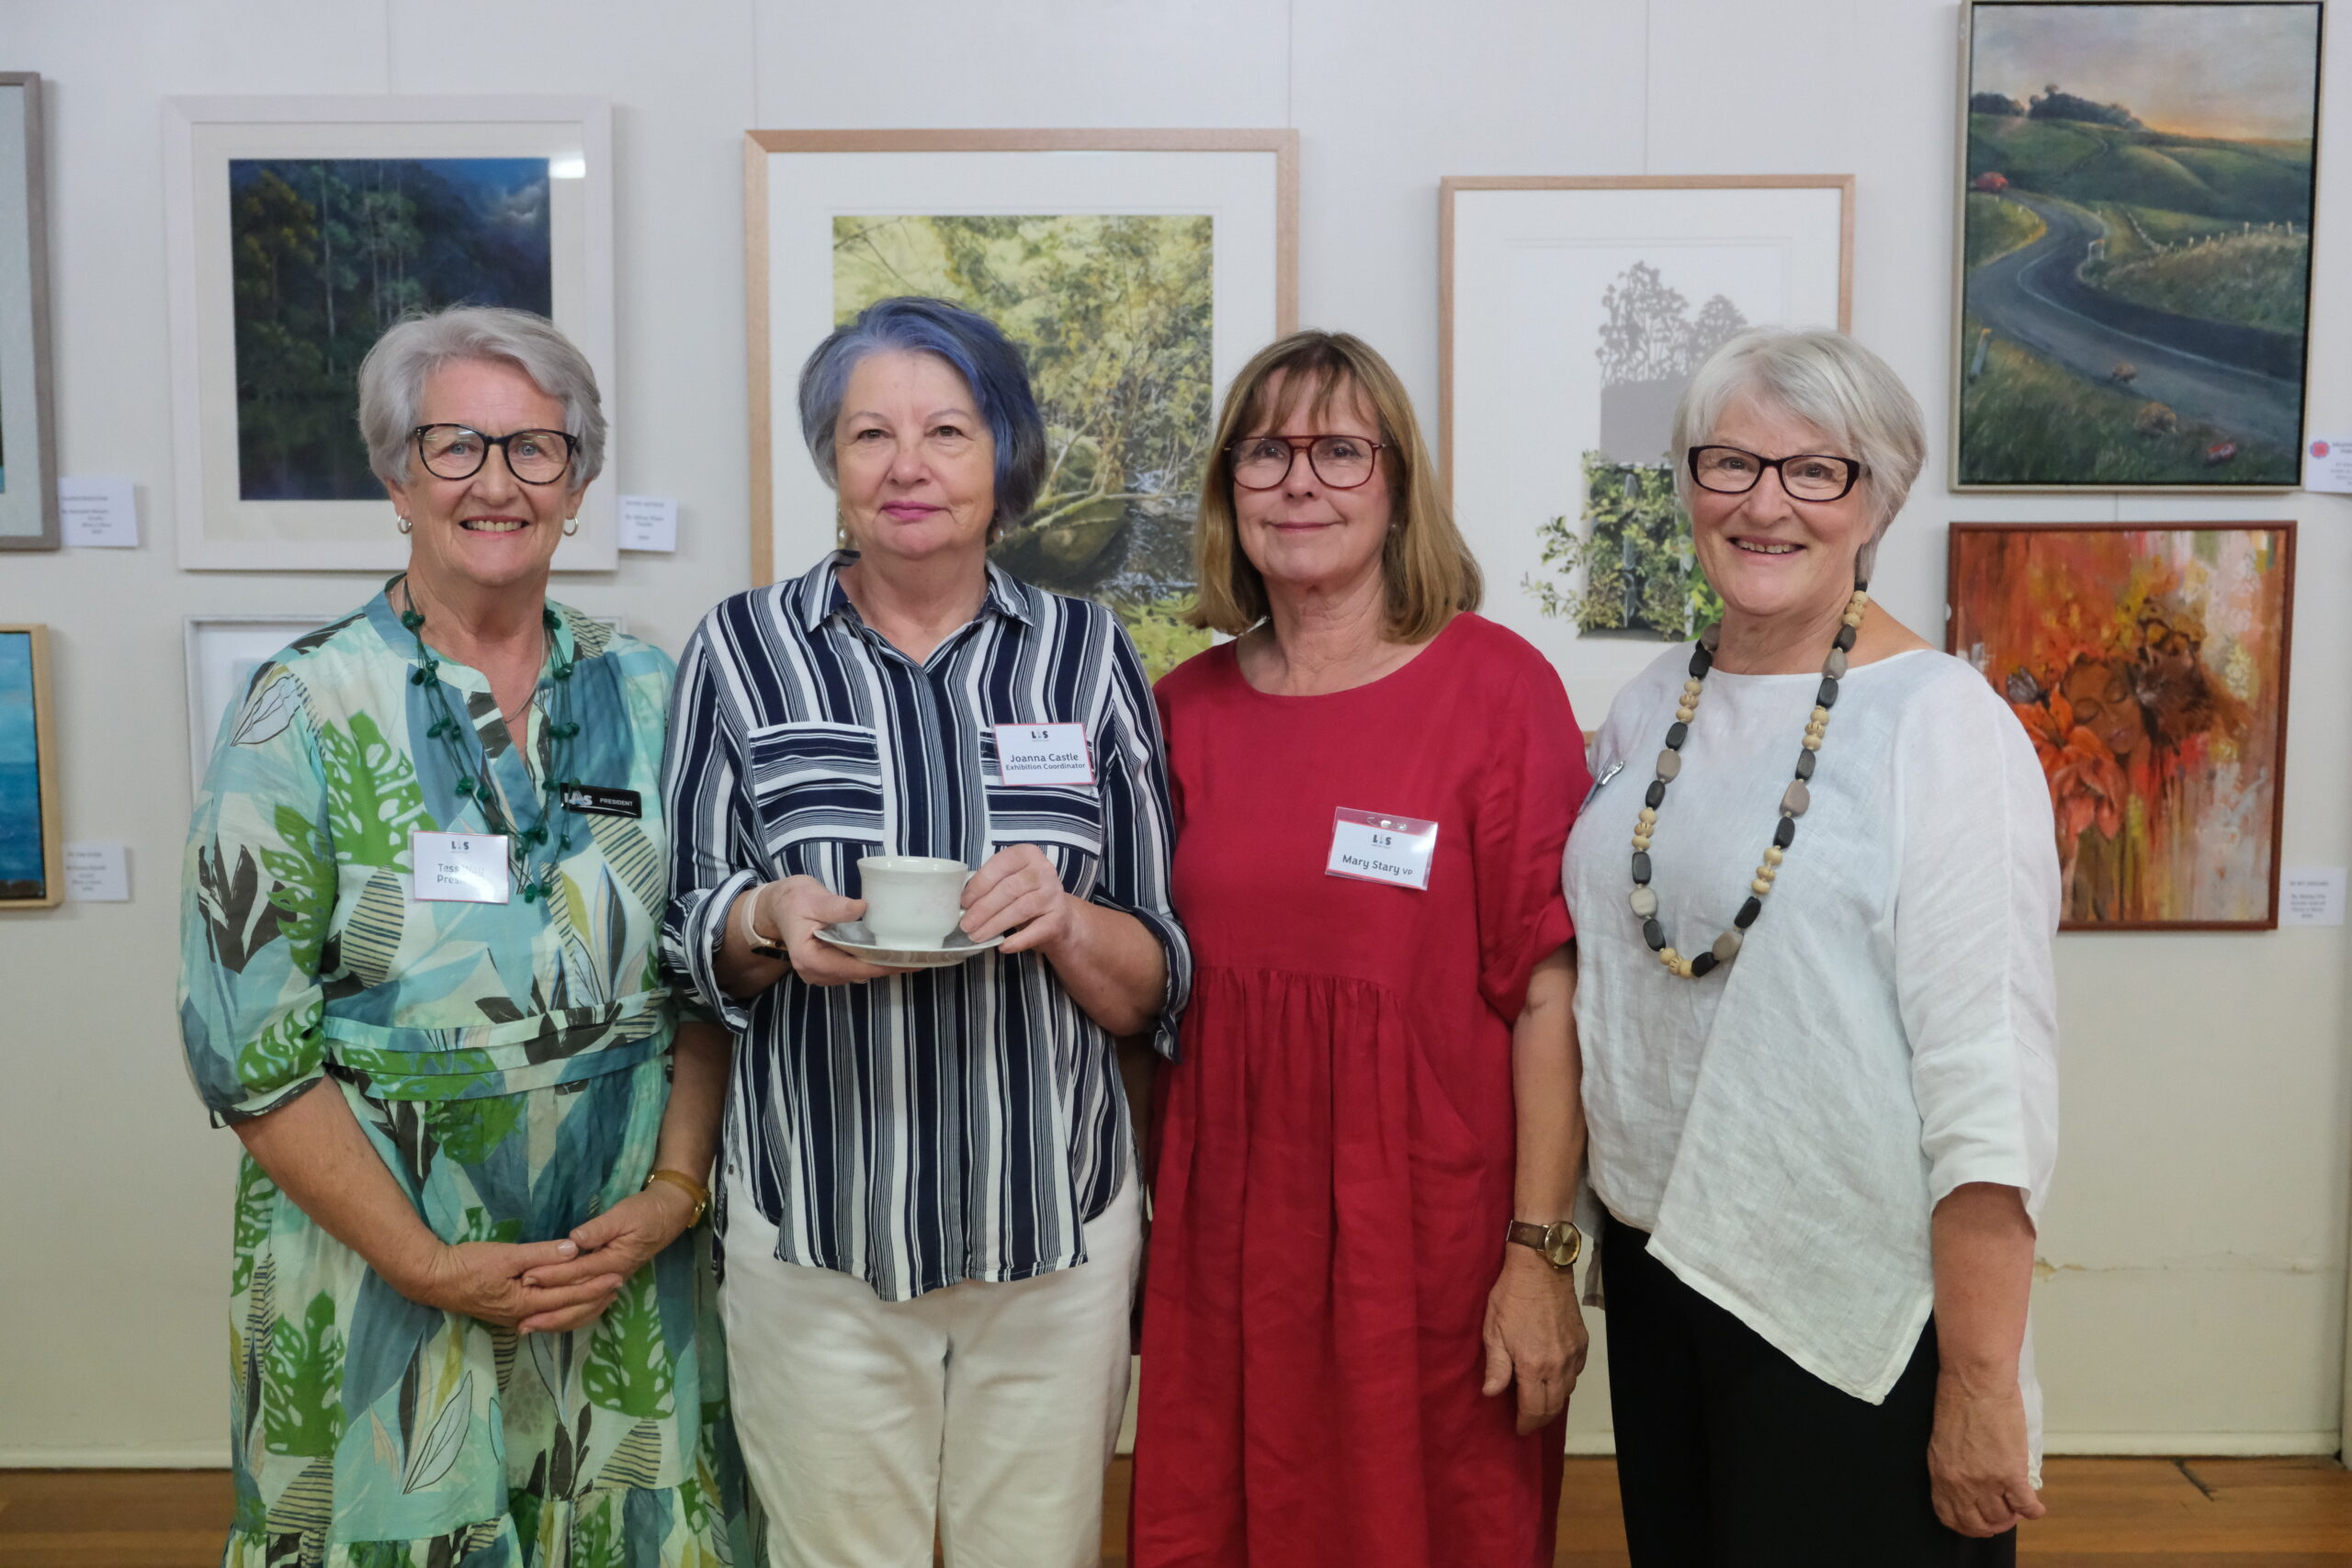 Image is of people at an art exhibition opening in front of paintings for the Art Society Profile Join the Launceston Art Society's Journey Through Education, Workshops and Exhibitions Art Trails Tasmania